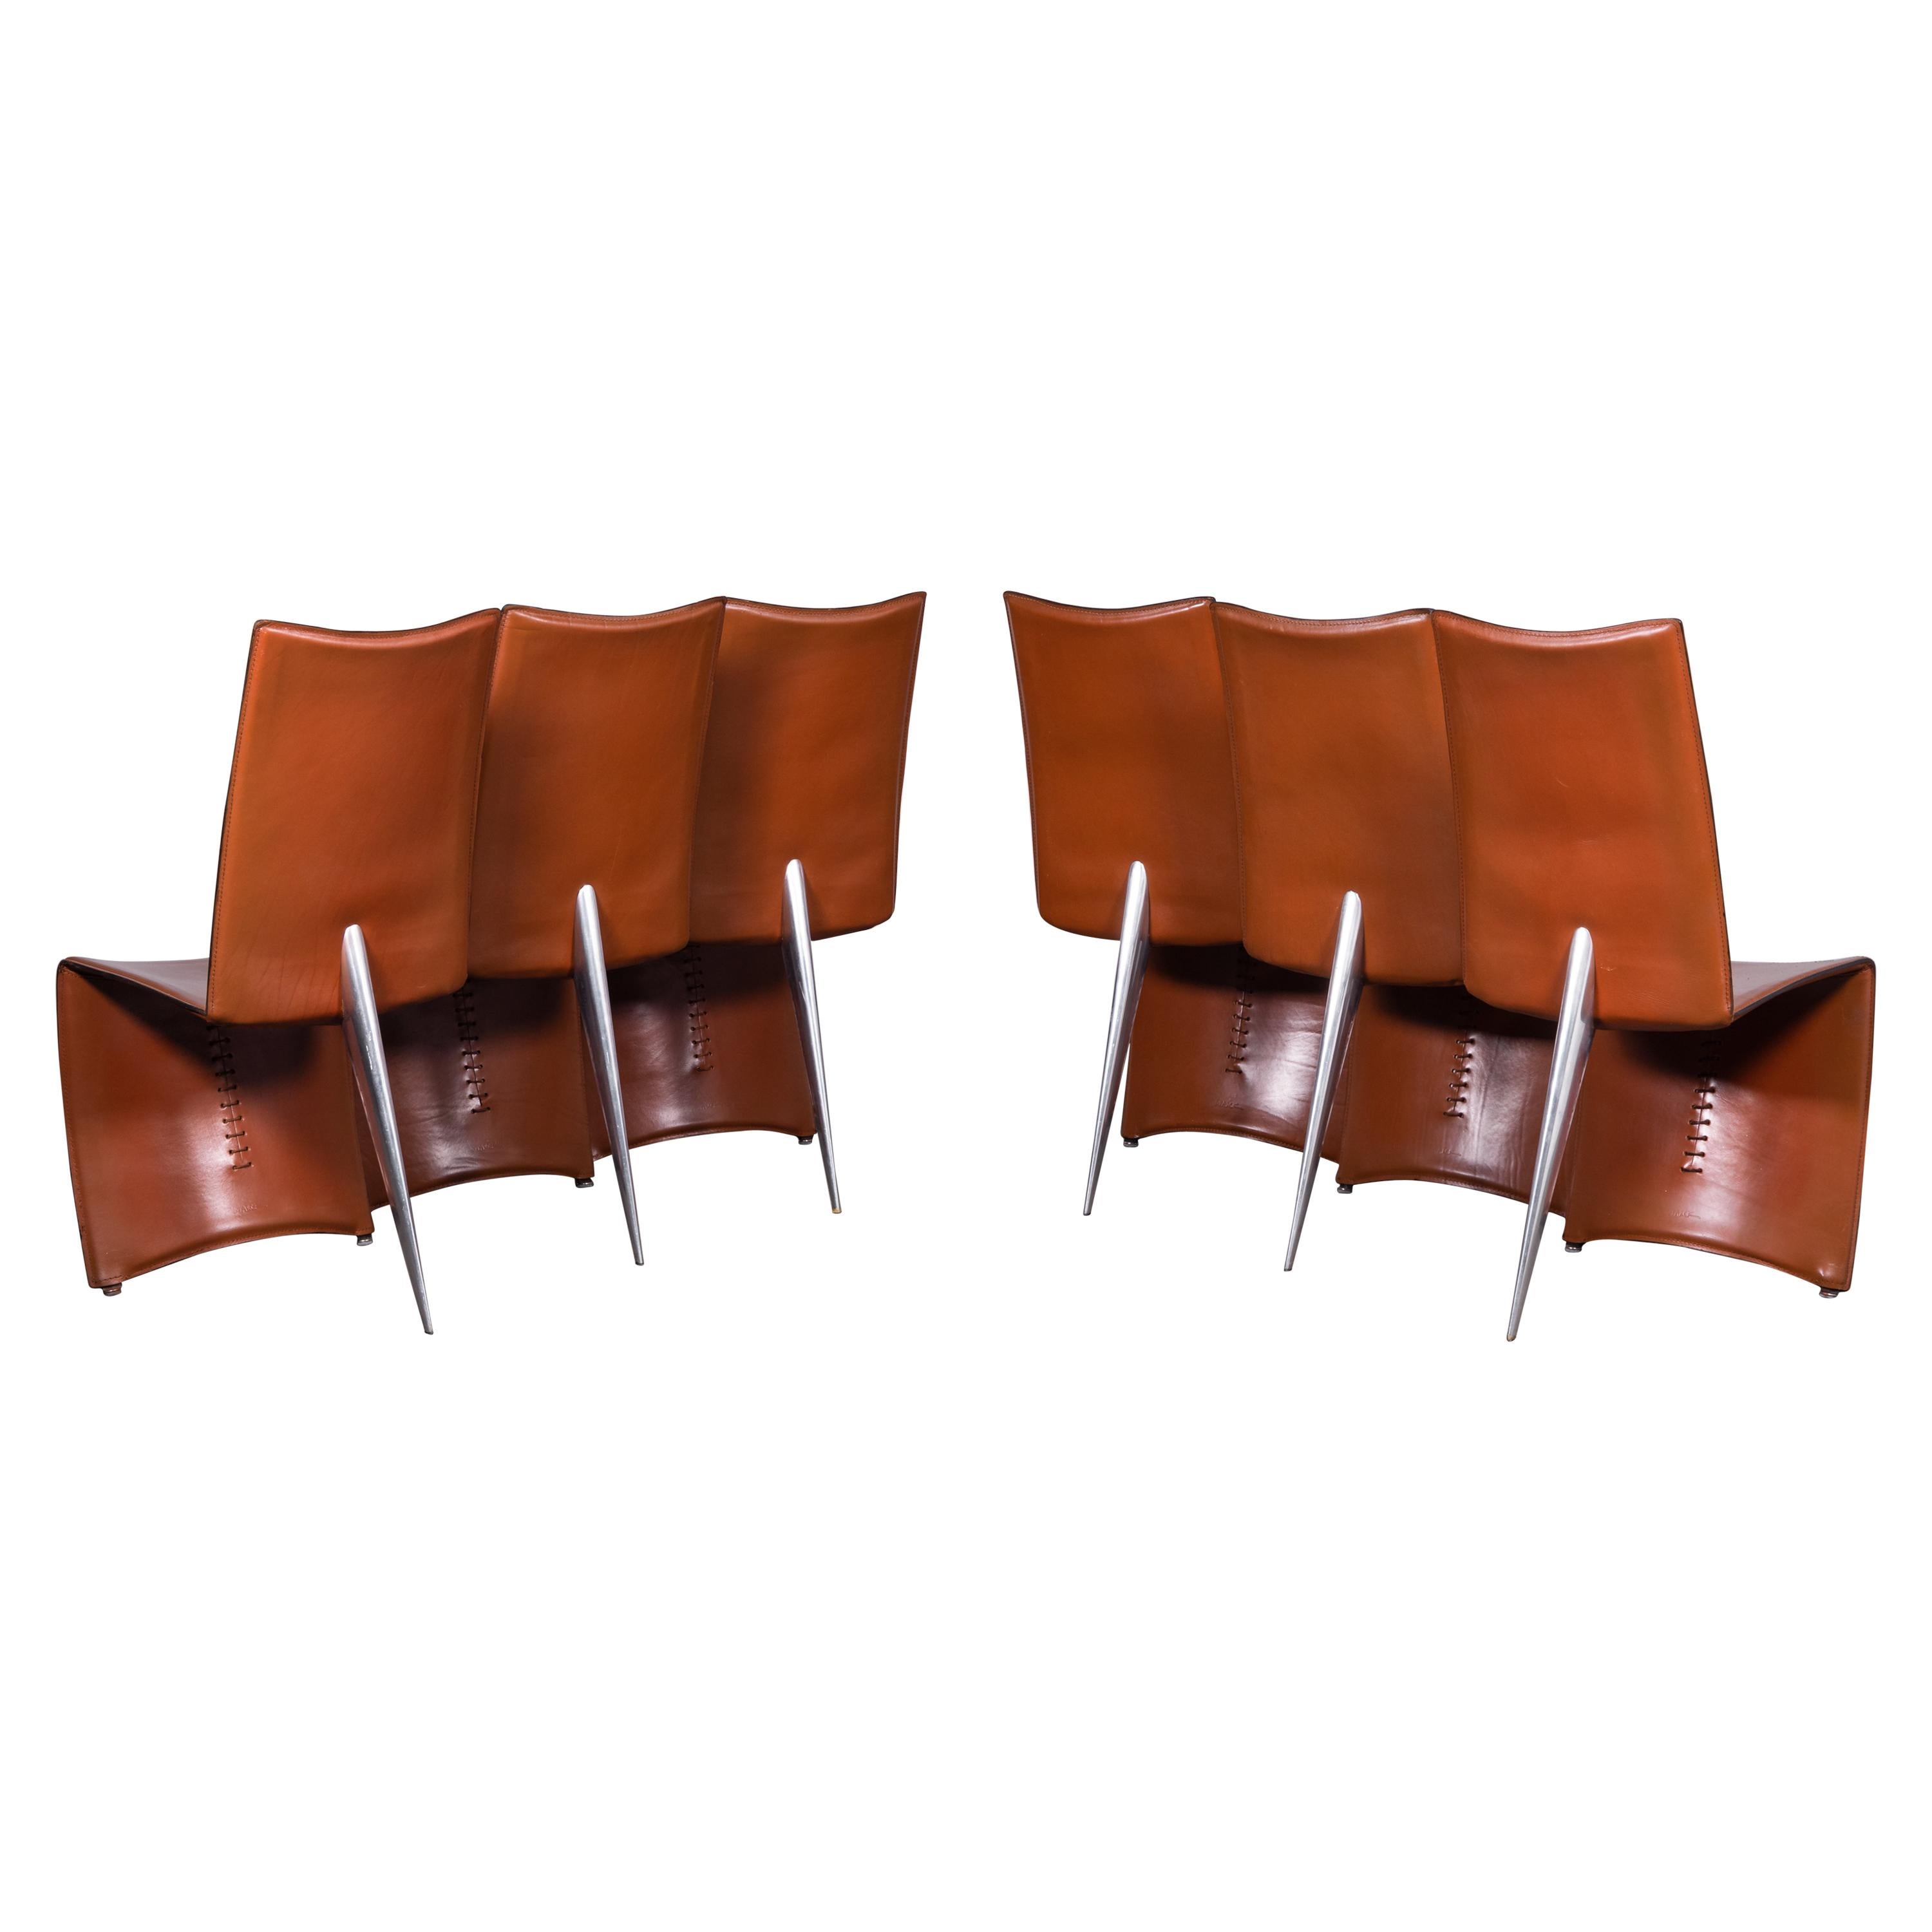 6 Cognac Leather Ed Archer Chairs by Philippe Starck for Driade / Aleph